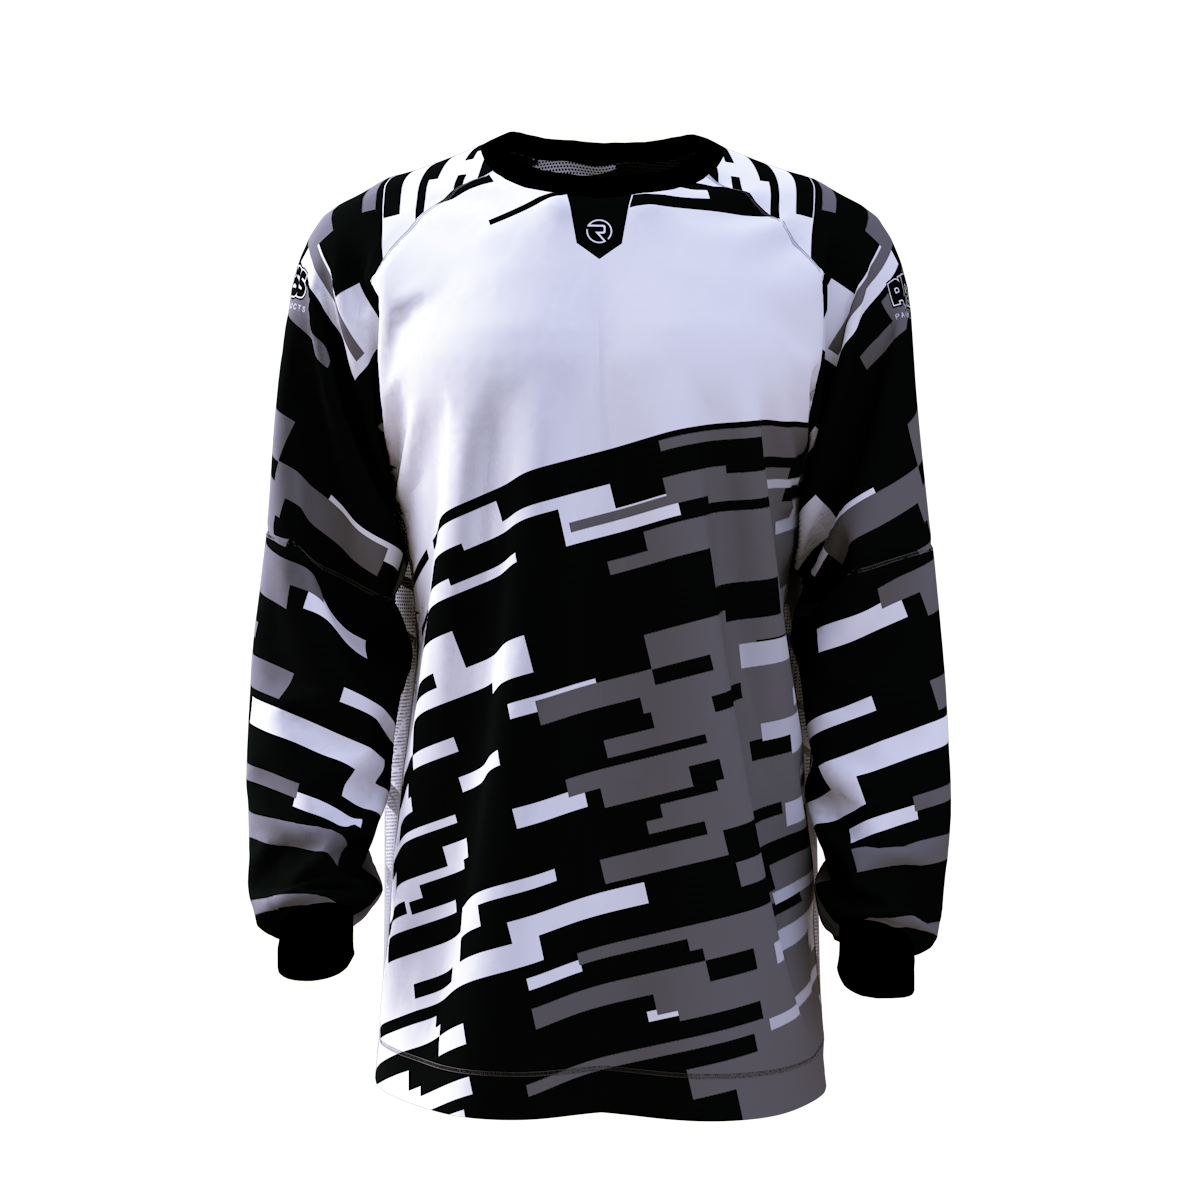 Ducks Breeze Jersey – Ruthless Paintball Products